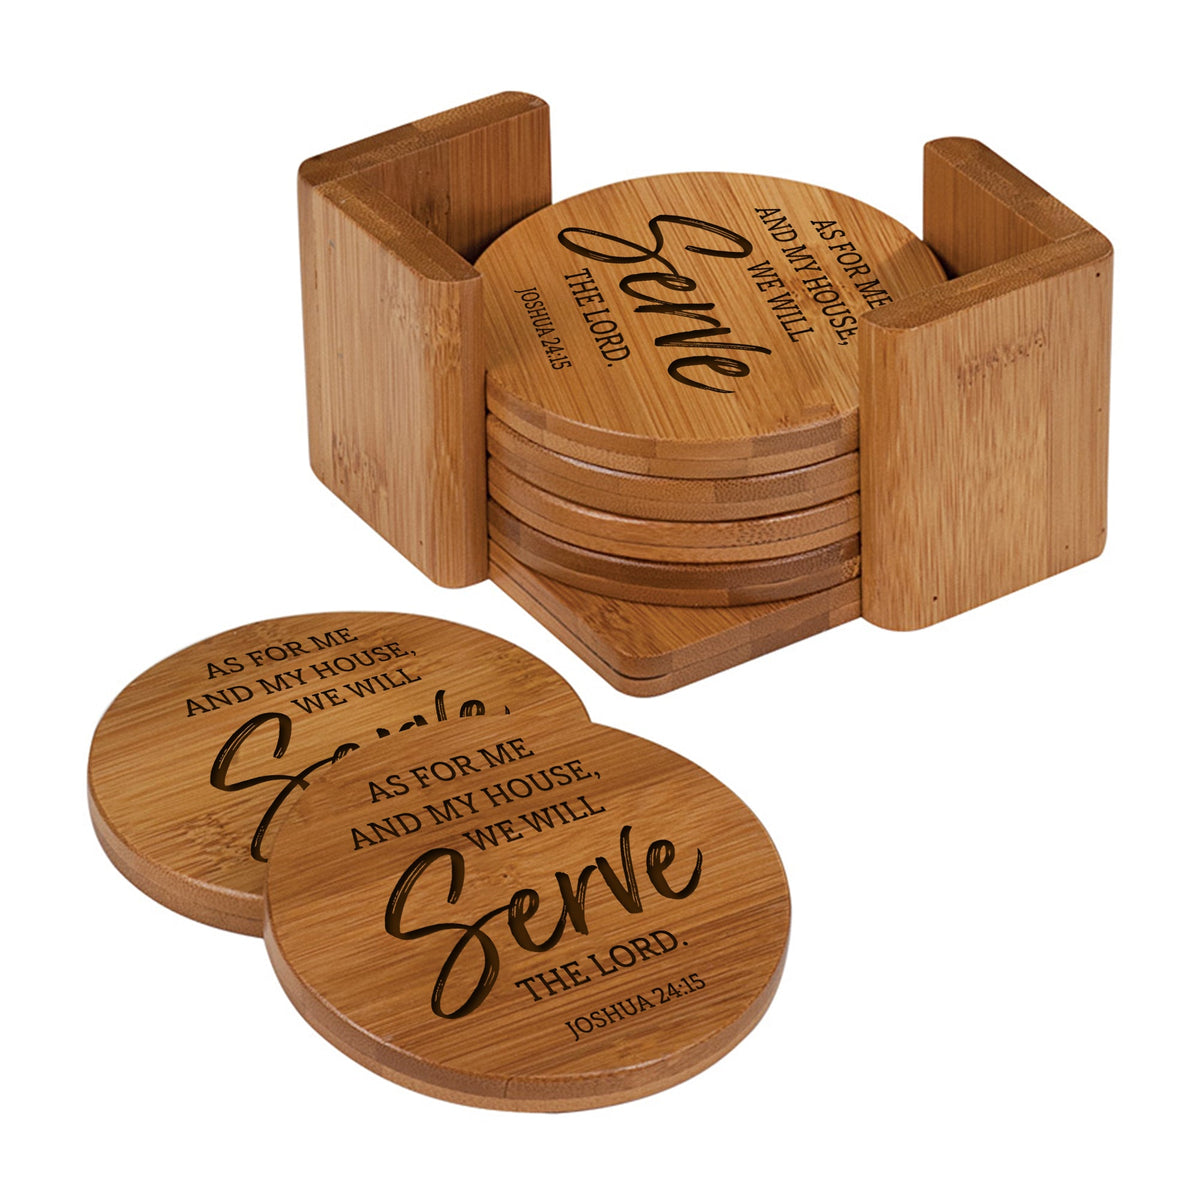 Modern Inspirational 6pc Bamboo Coaster Set 4.5x4.5 And So Together - LifeSong Milestones